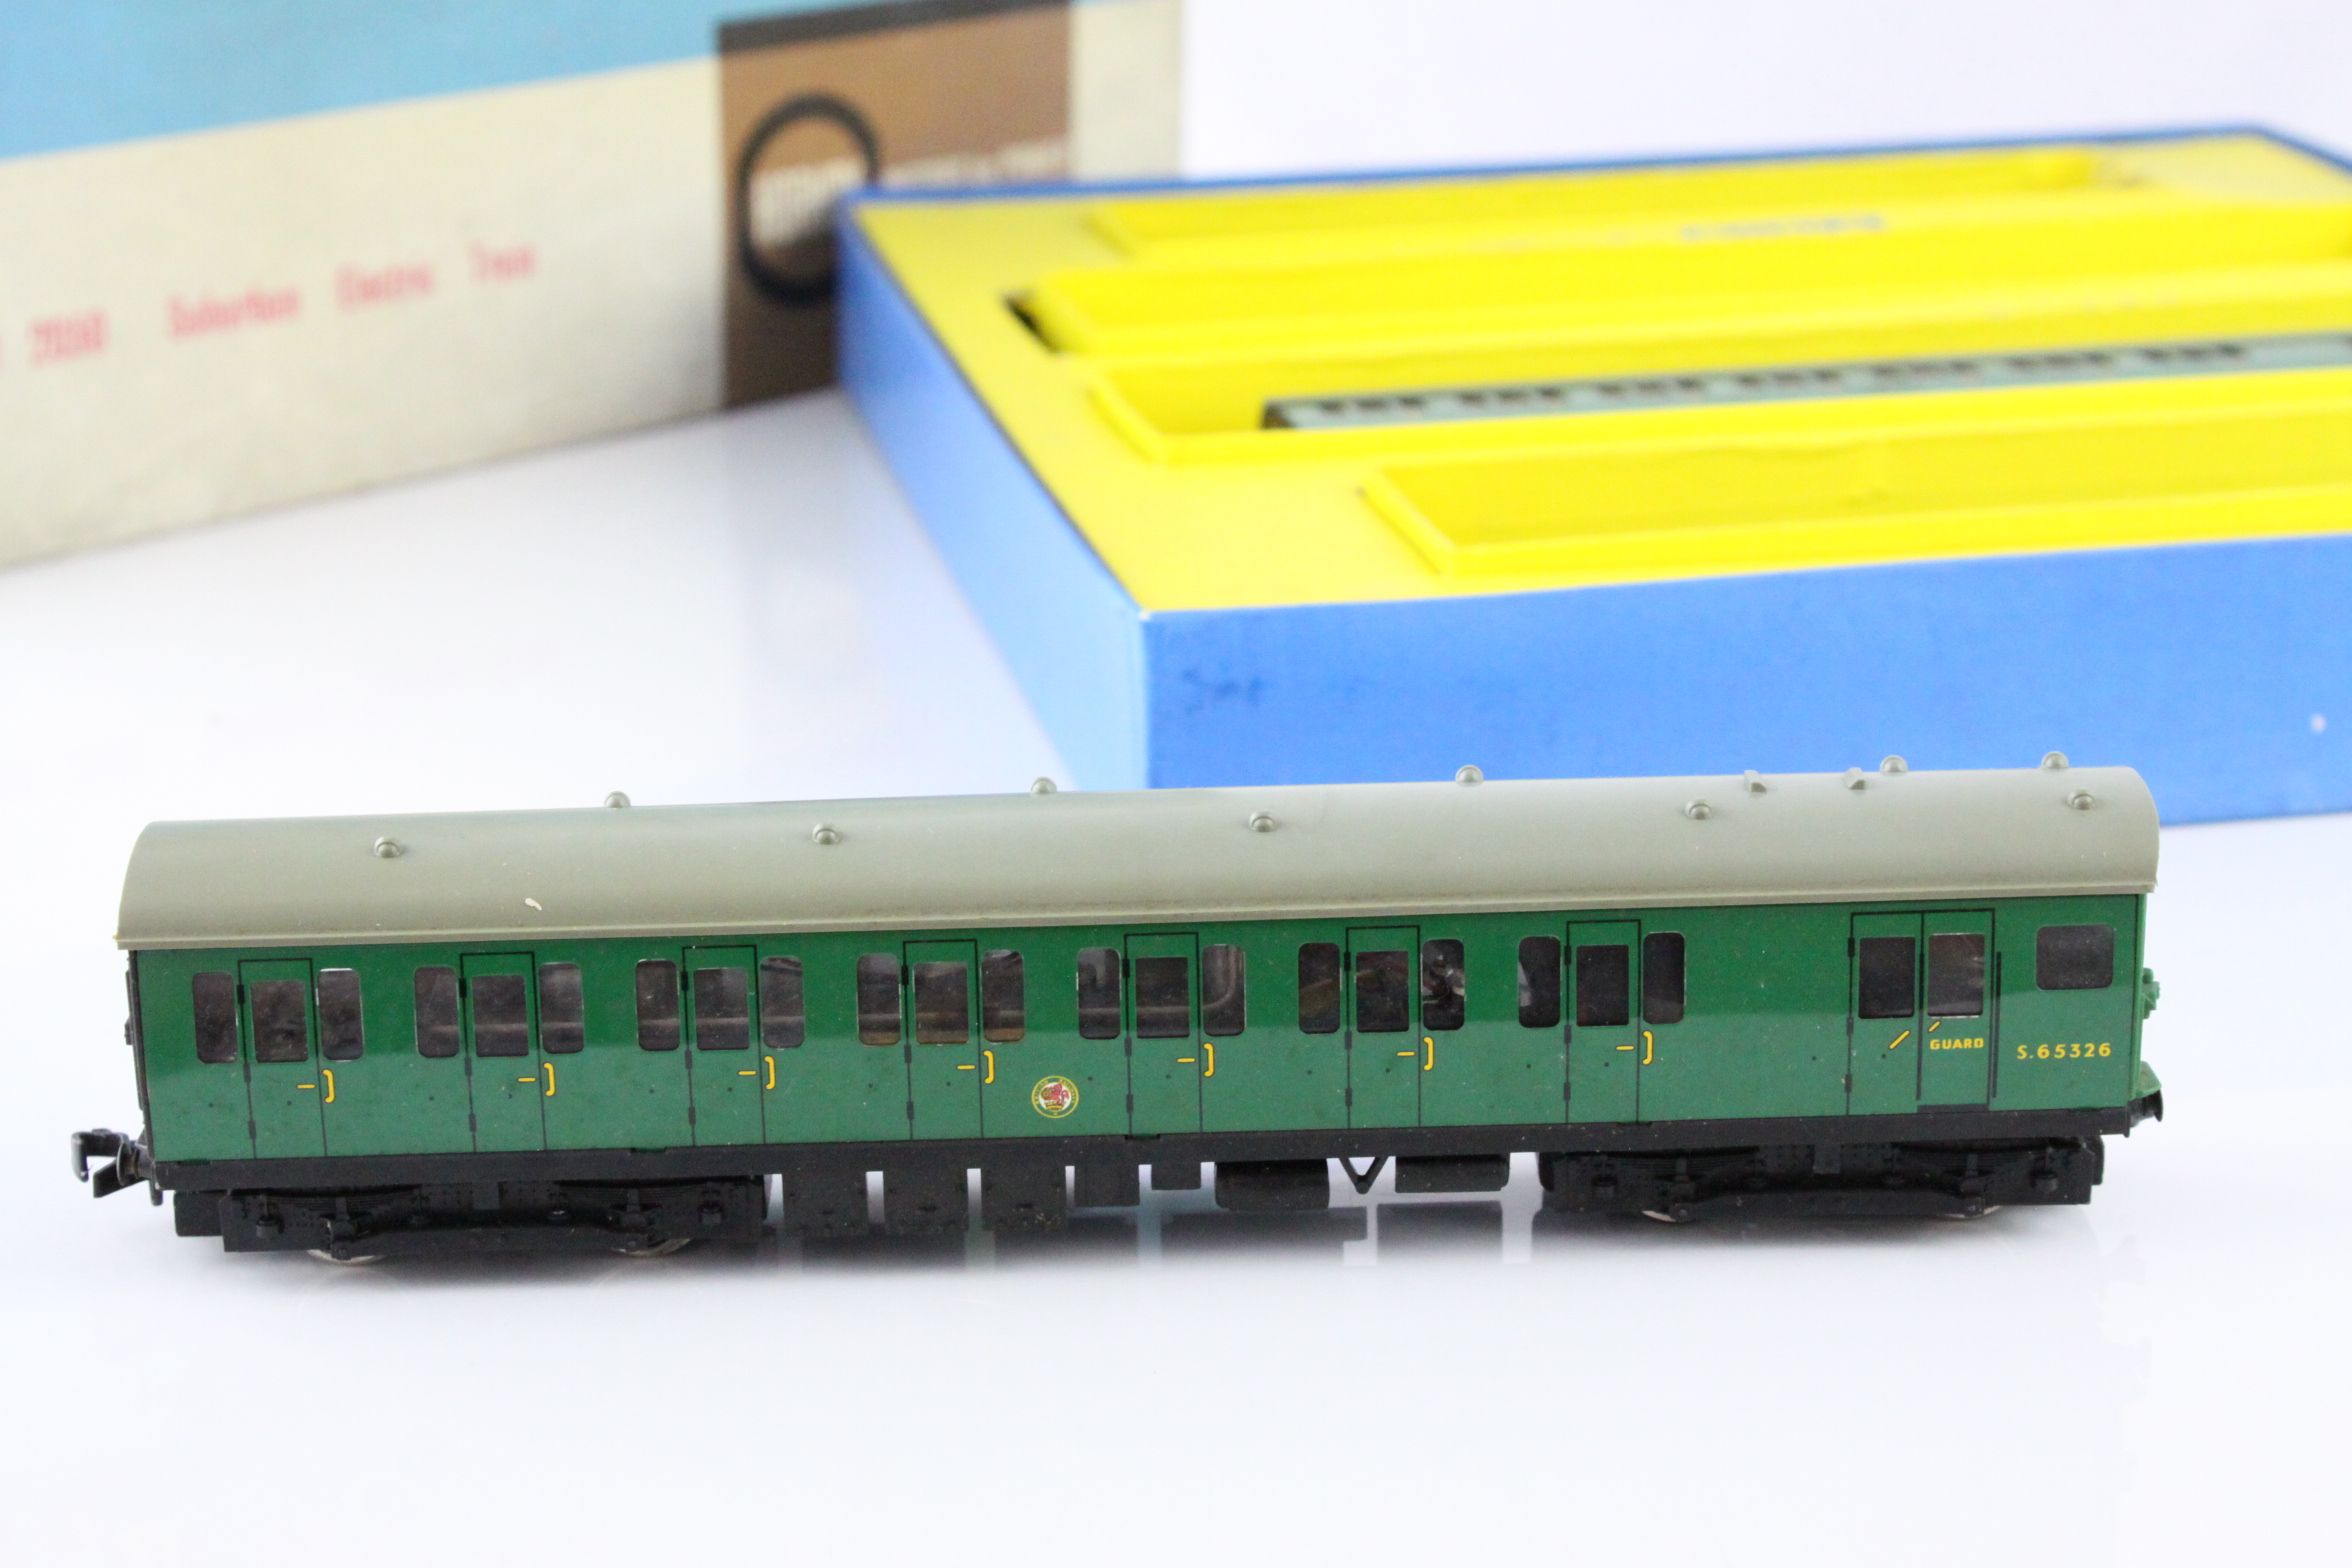 Boxed Hornby Dublo 2050 Surburban Electric Train Set, complete with paperwork, vg - Image 3 of 8